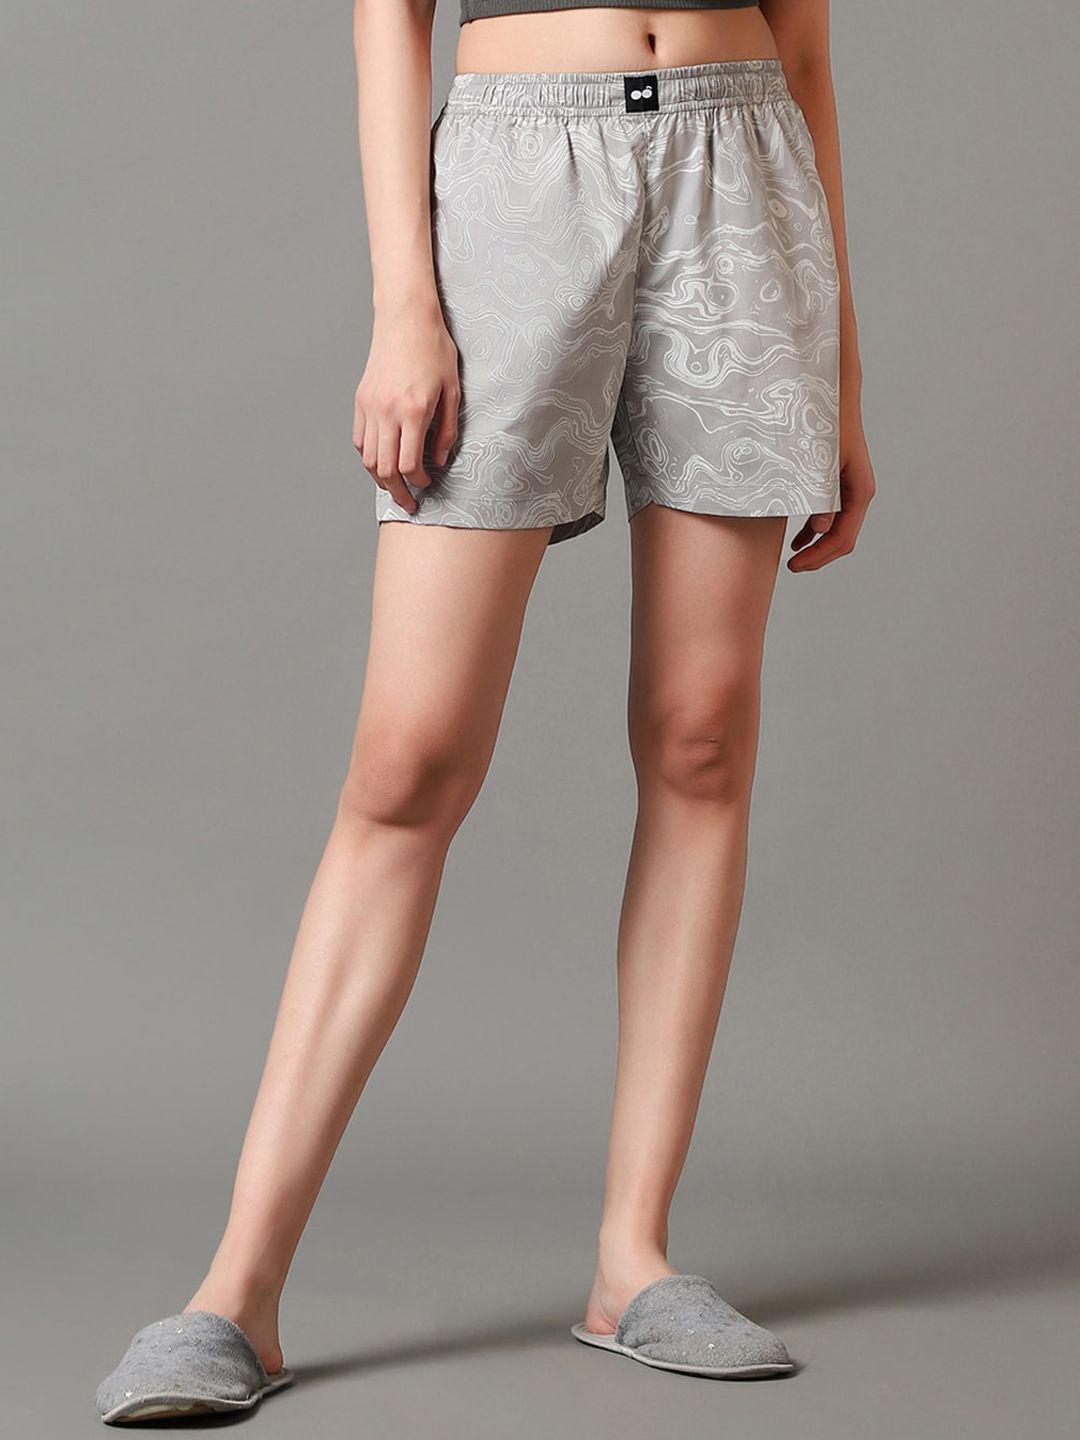 bewakoof-women-grey-mid-rise-abstract-printed-cotton-lounge-shorts